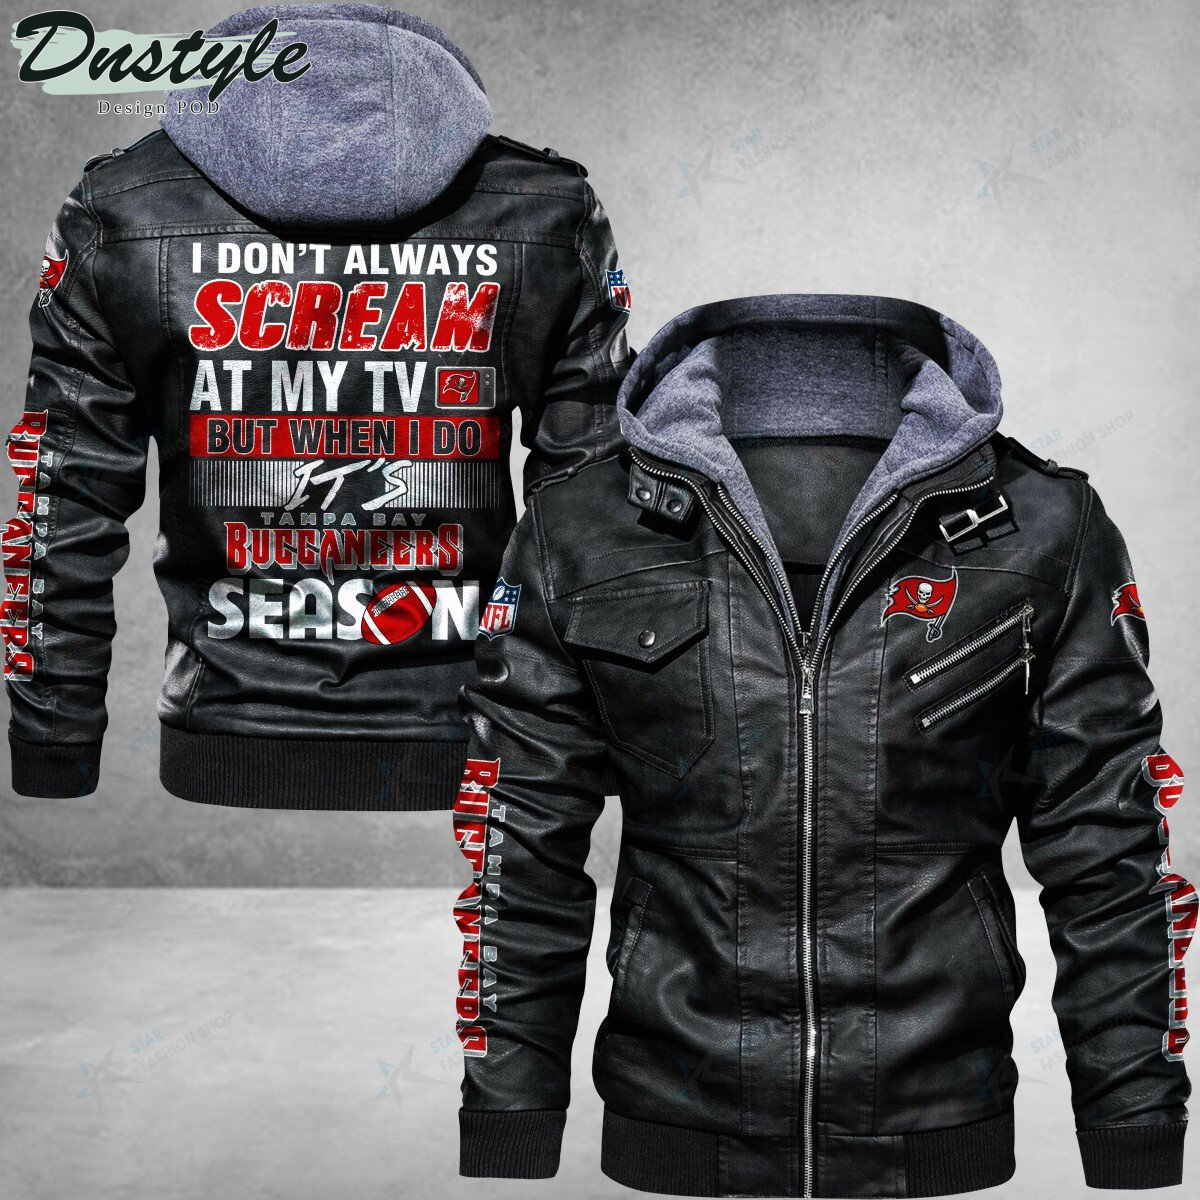 Tampa Bay Buccaneers I don't Always Scream At My TV Leather Jacket